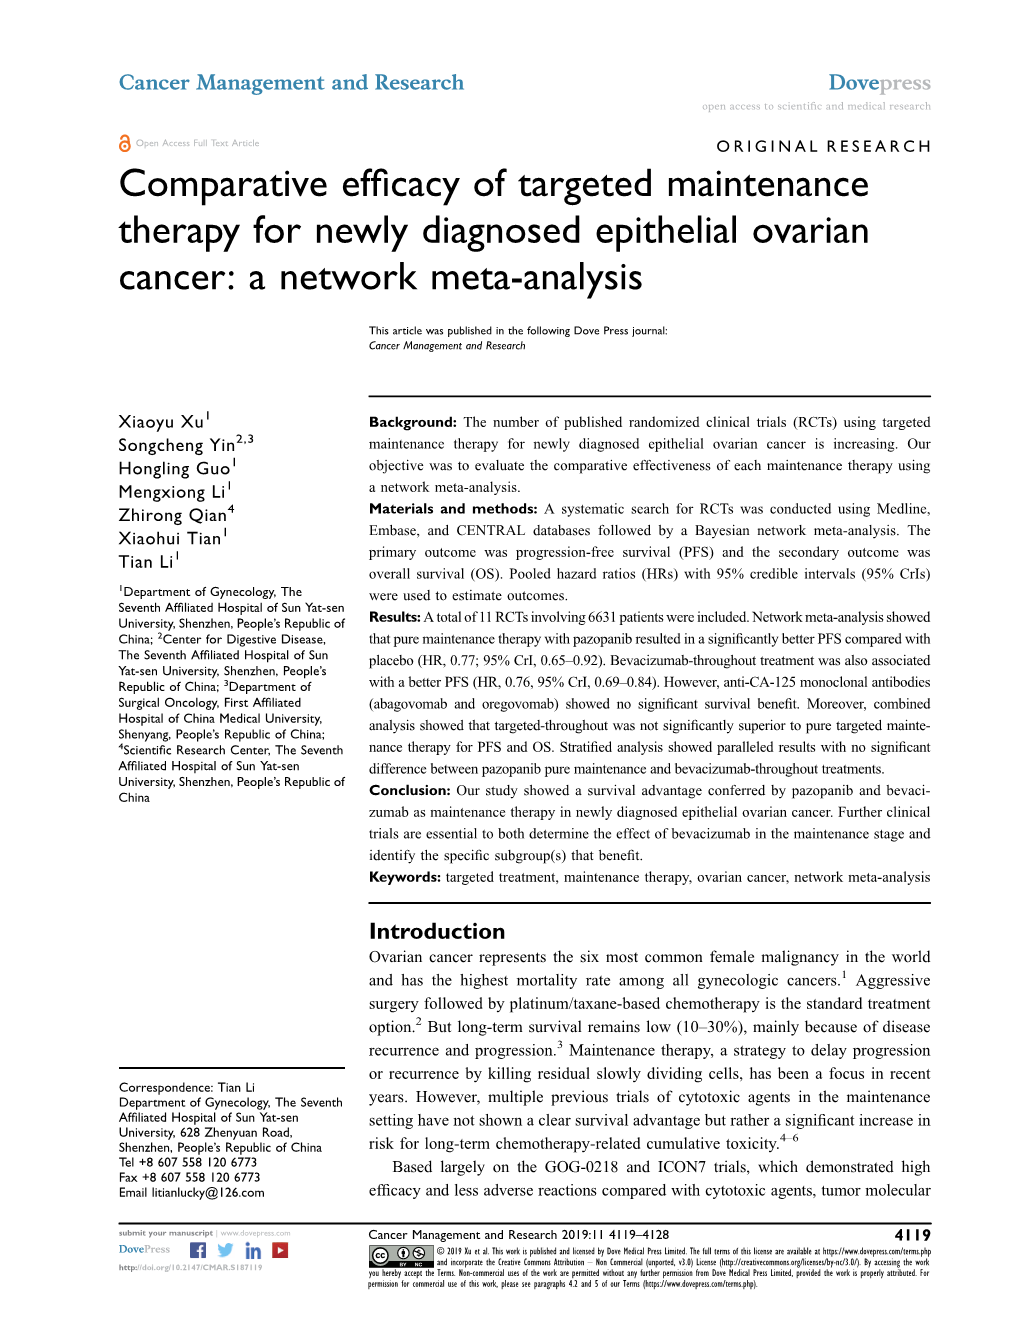 Comparative Efficacy of Targeted Maintenance